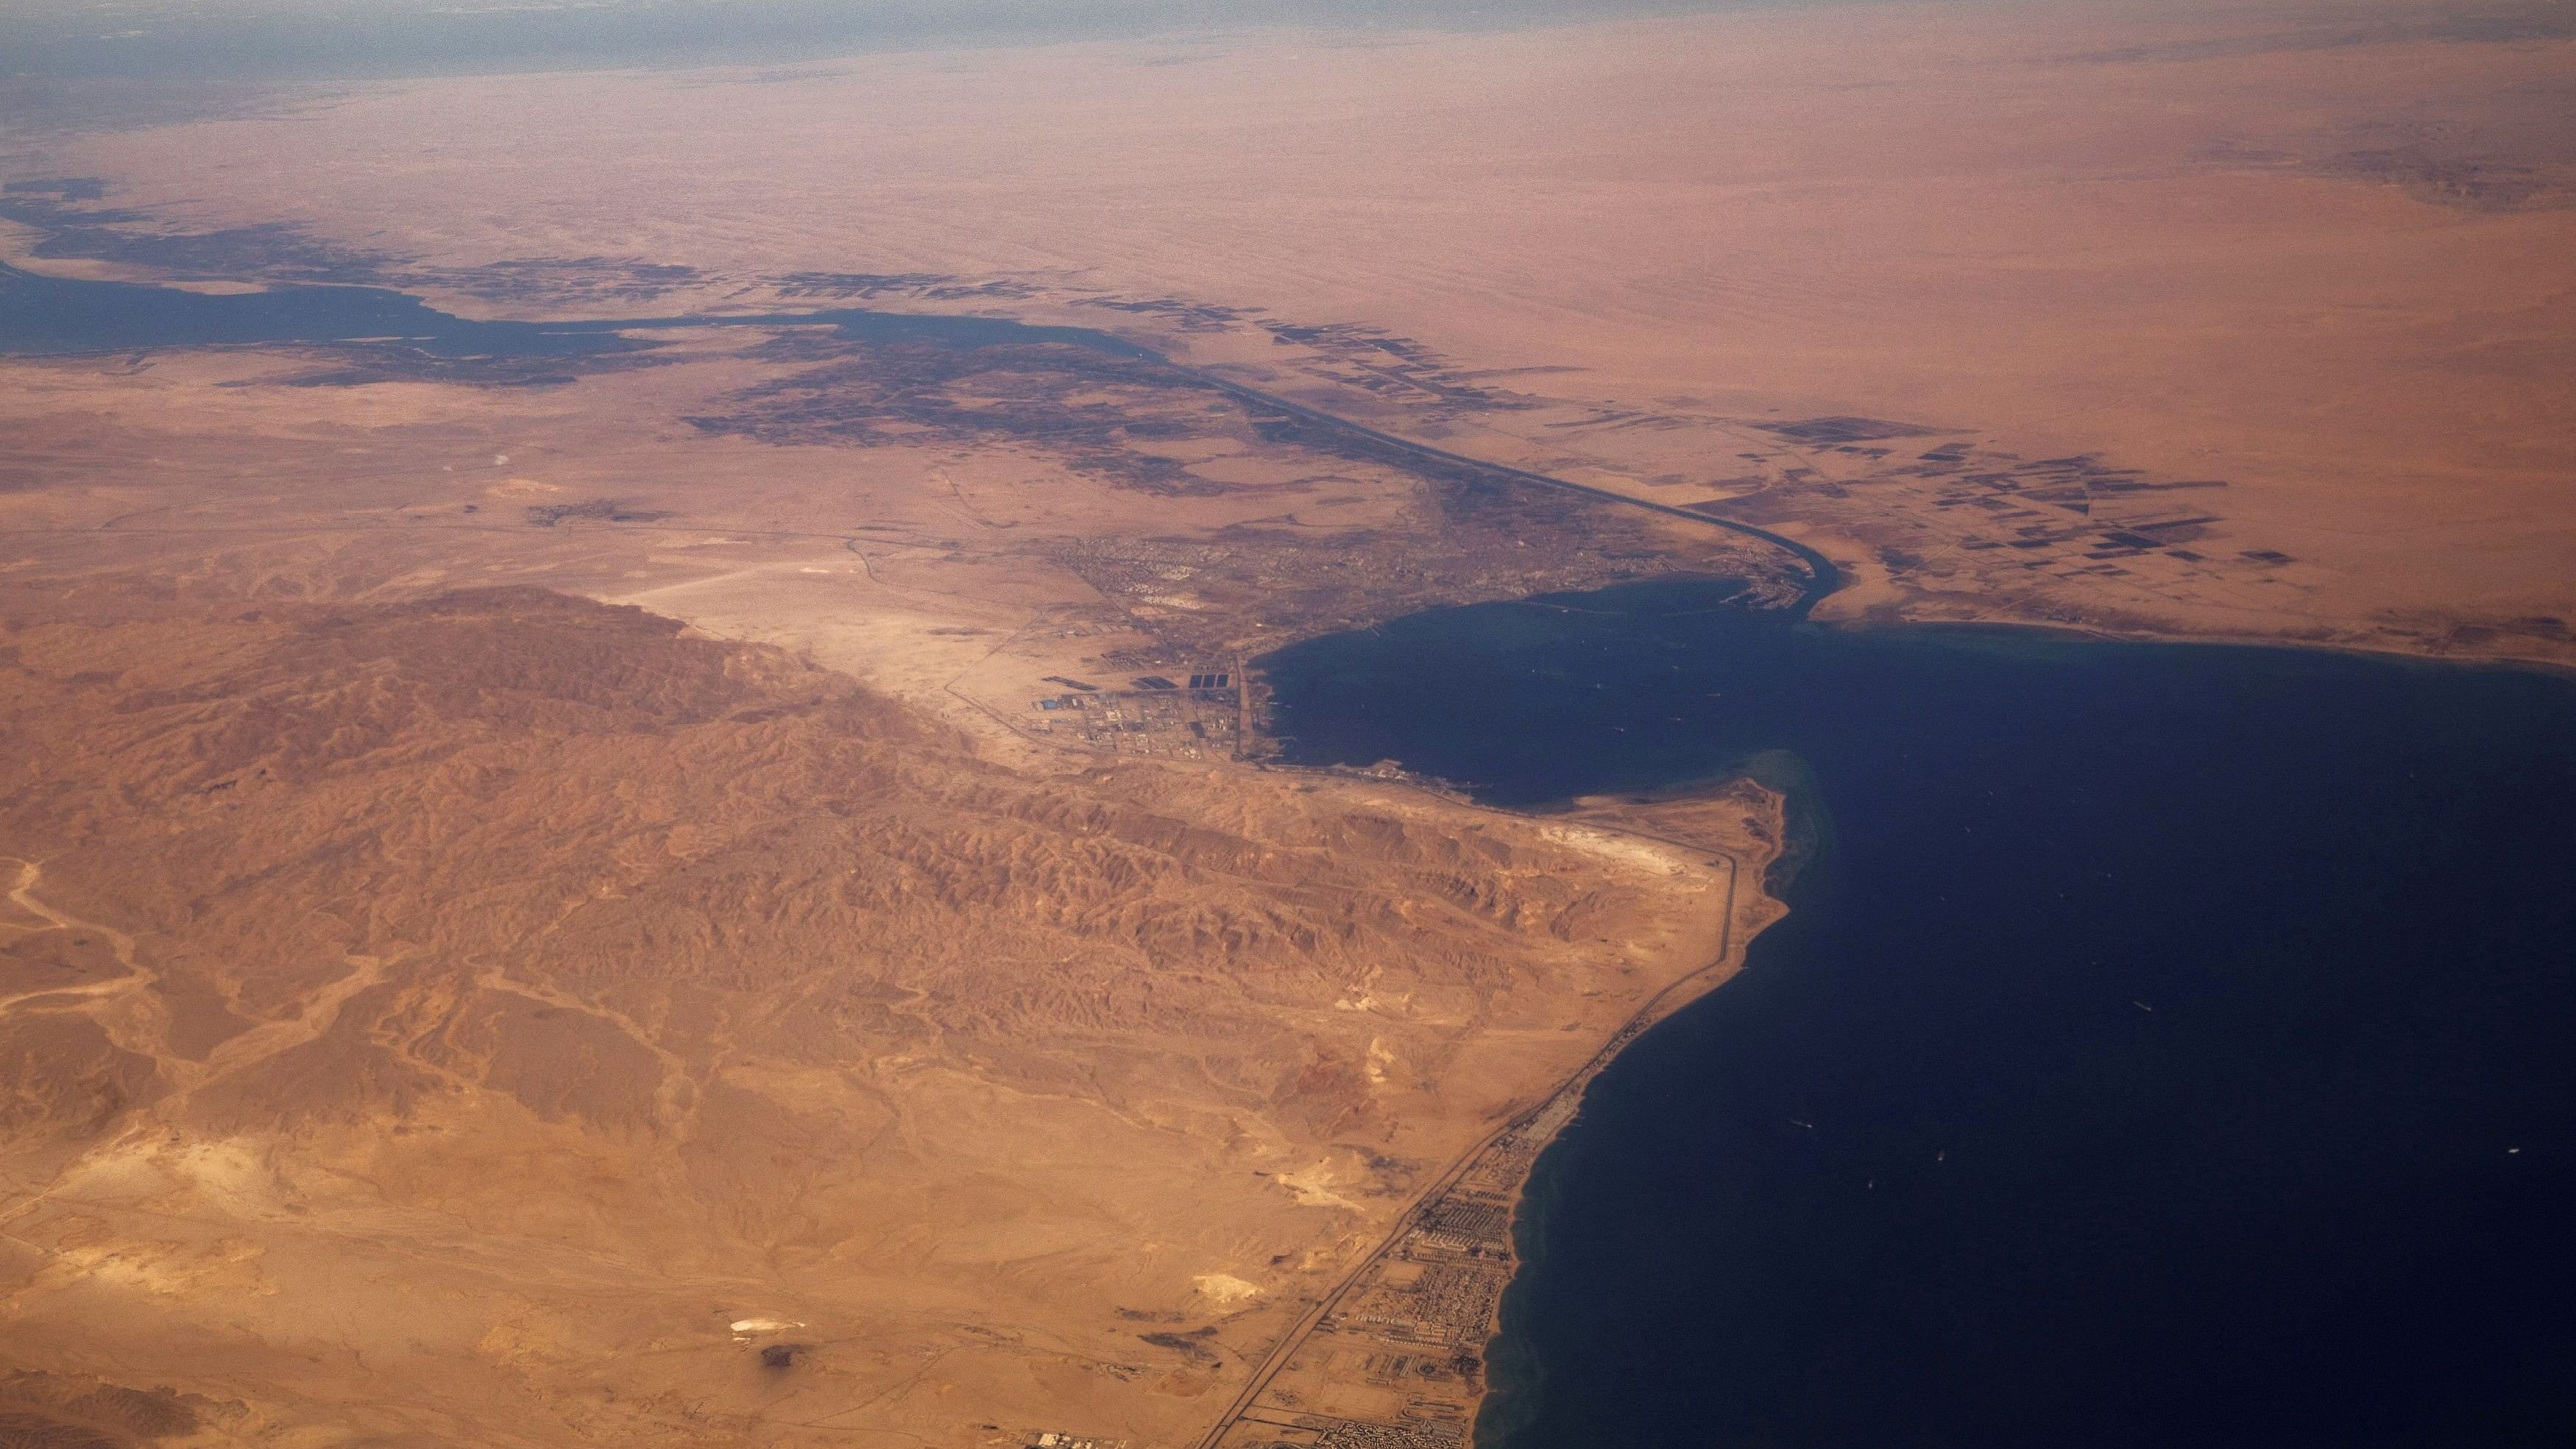 <div class="paragraphs"><p>The Suez Canal connecting the Mediterranean Sea to the Red Sea is pictured from the window of a commercial plane</p></div>